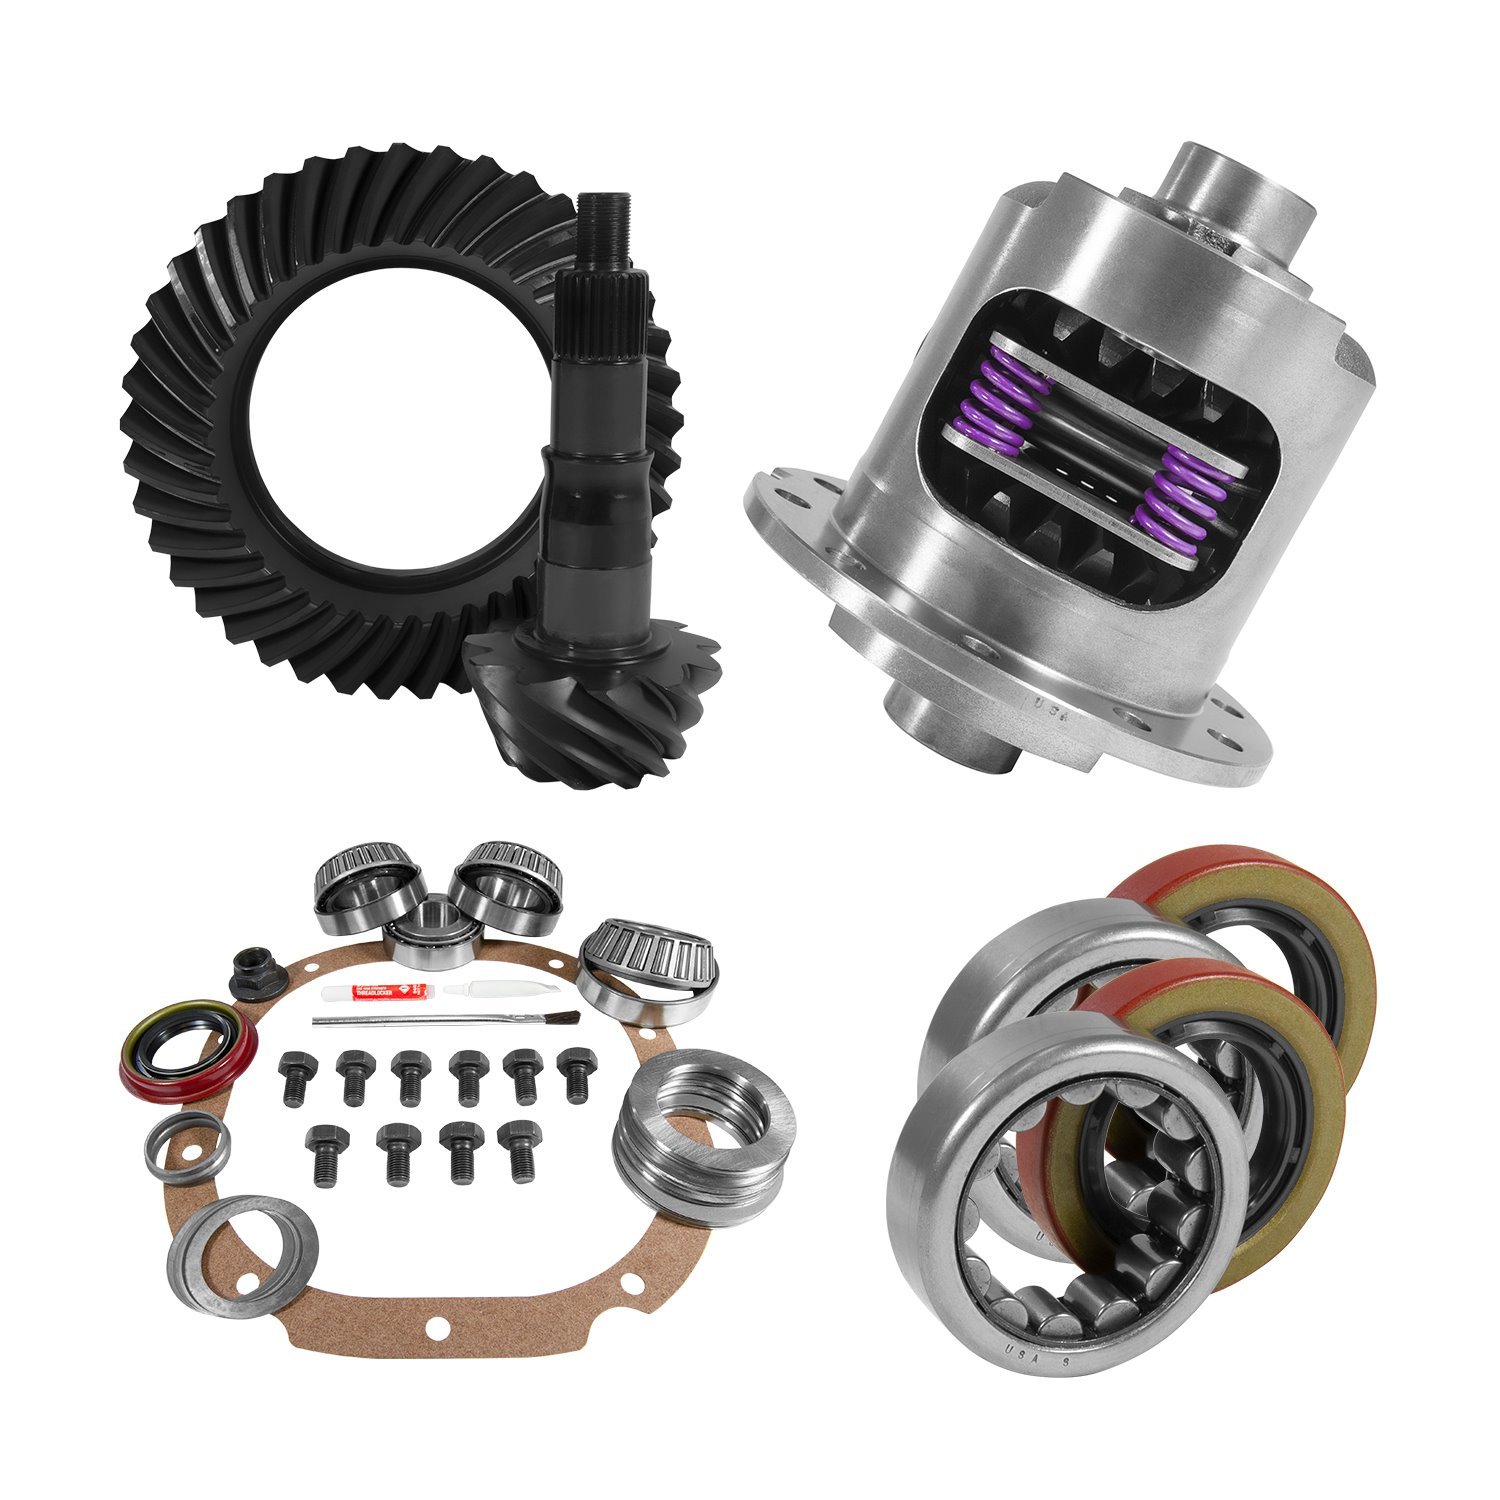 USA Standard 10675 8.8 in. Ford 3.27 Rear Ring & Pinion Install Kit, 28Spl Posi, 2.25 in. Axle Bearings